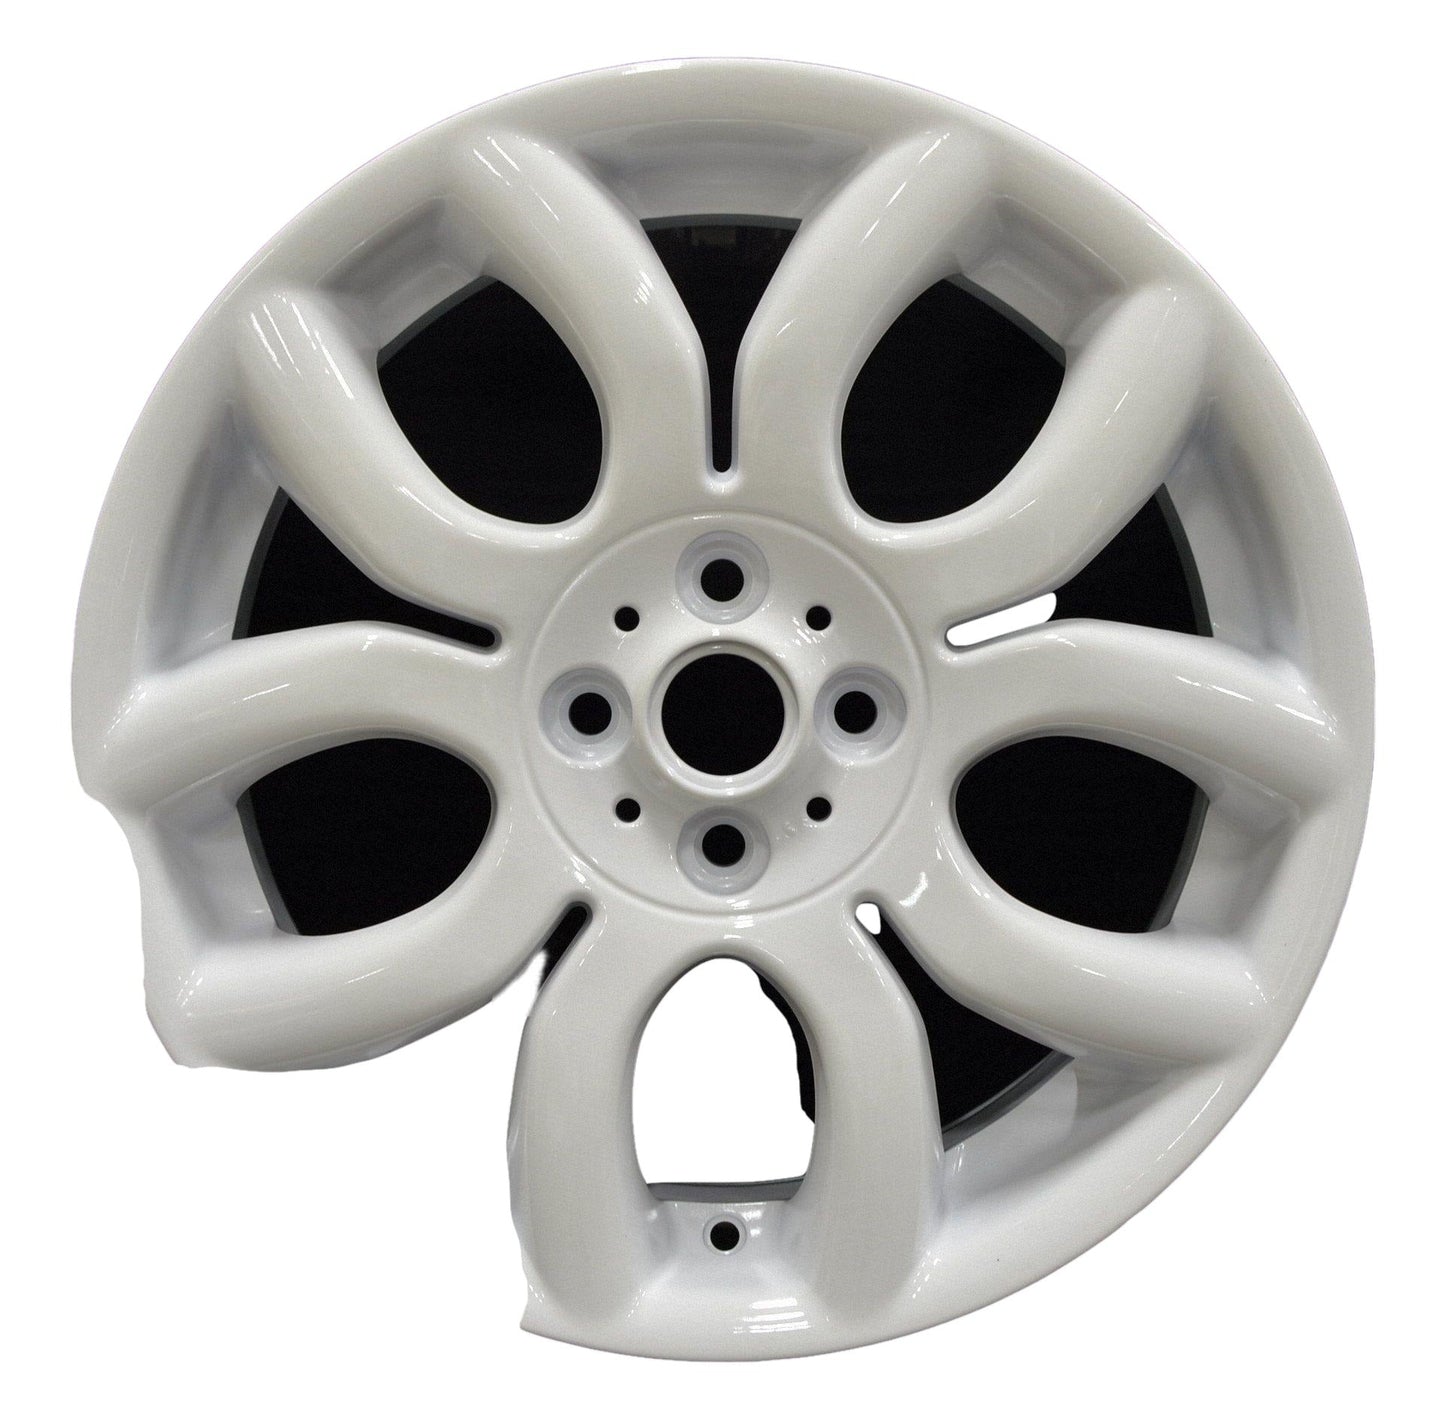 MINI Cooper Coupe  2011, 2012, 2013, 2014 Factory OEM Car Wheel Size 17x7 Alloy WAO.59572.PW01.FF